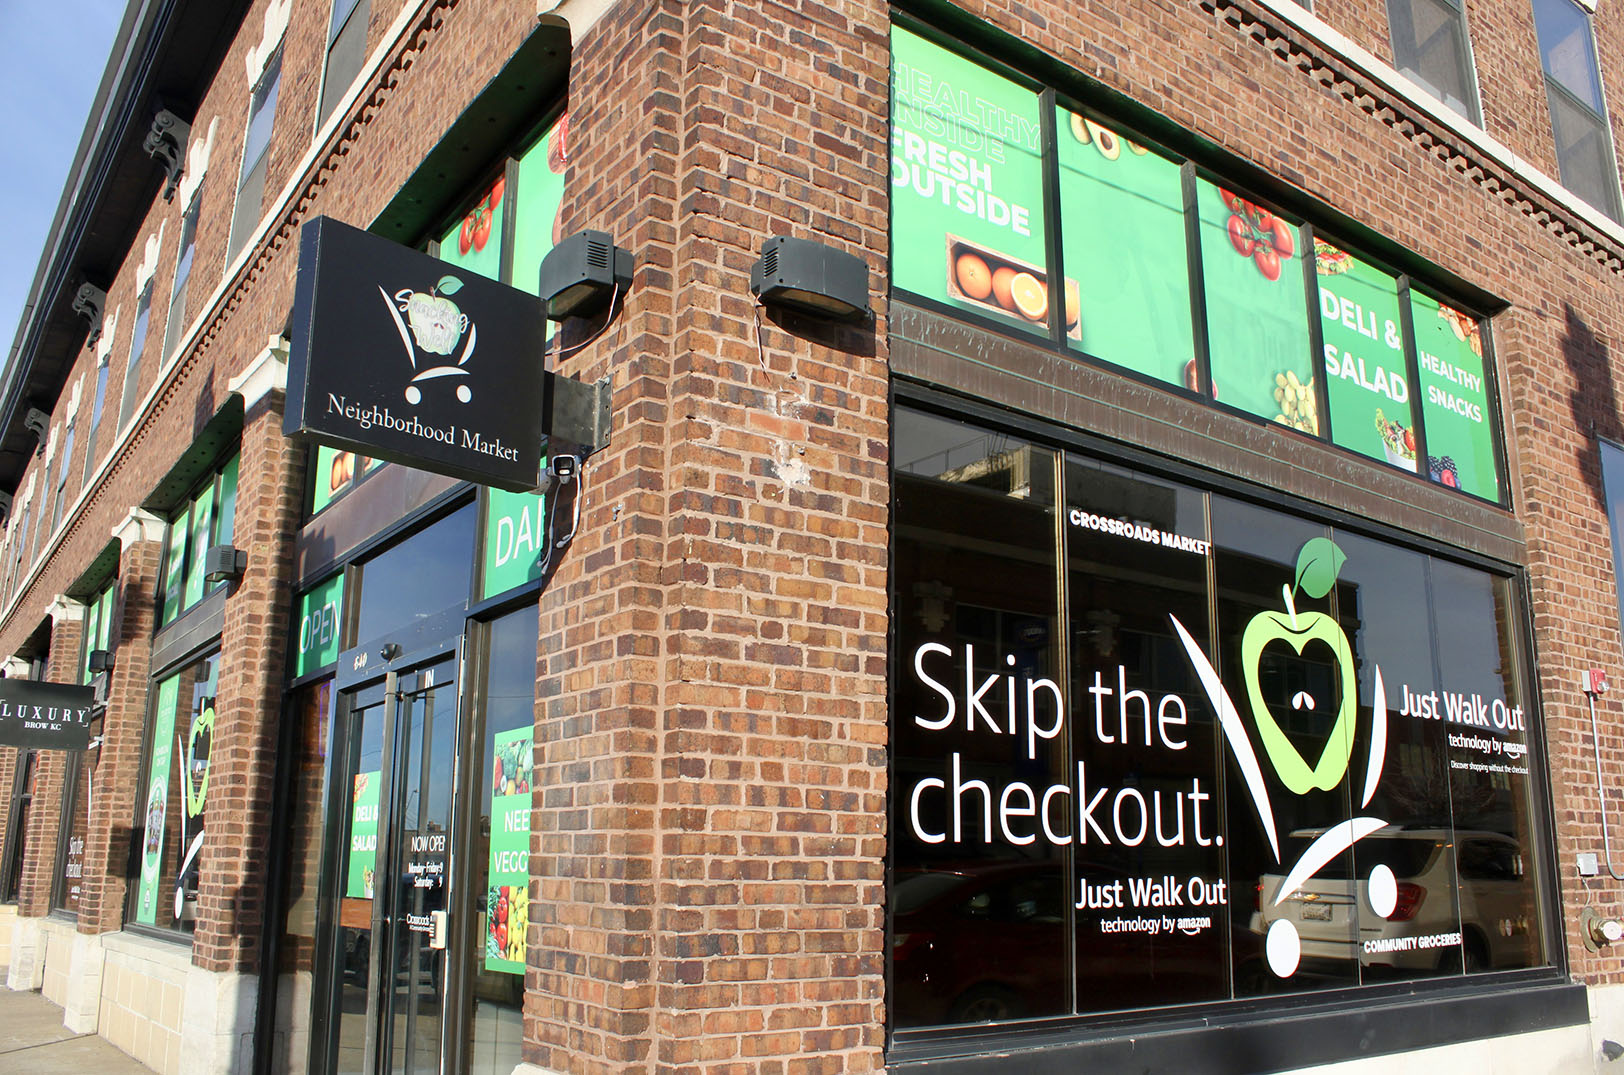 Just Walk Out: Crossroads Market features Amazon tech for checkout-free convenience